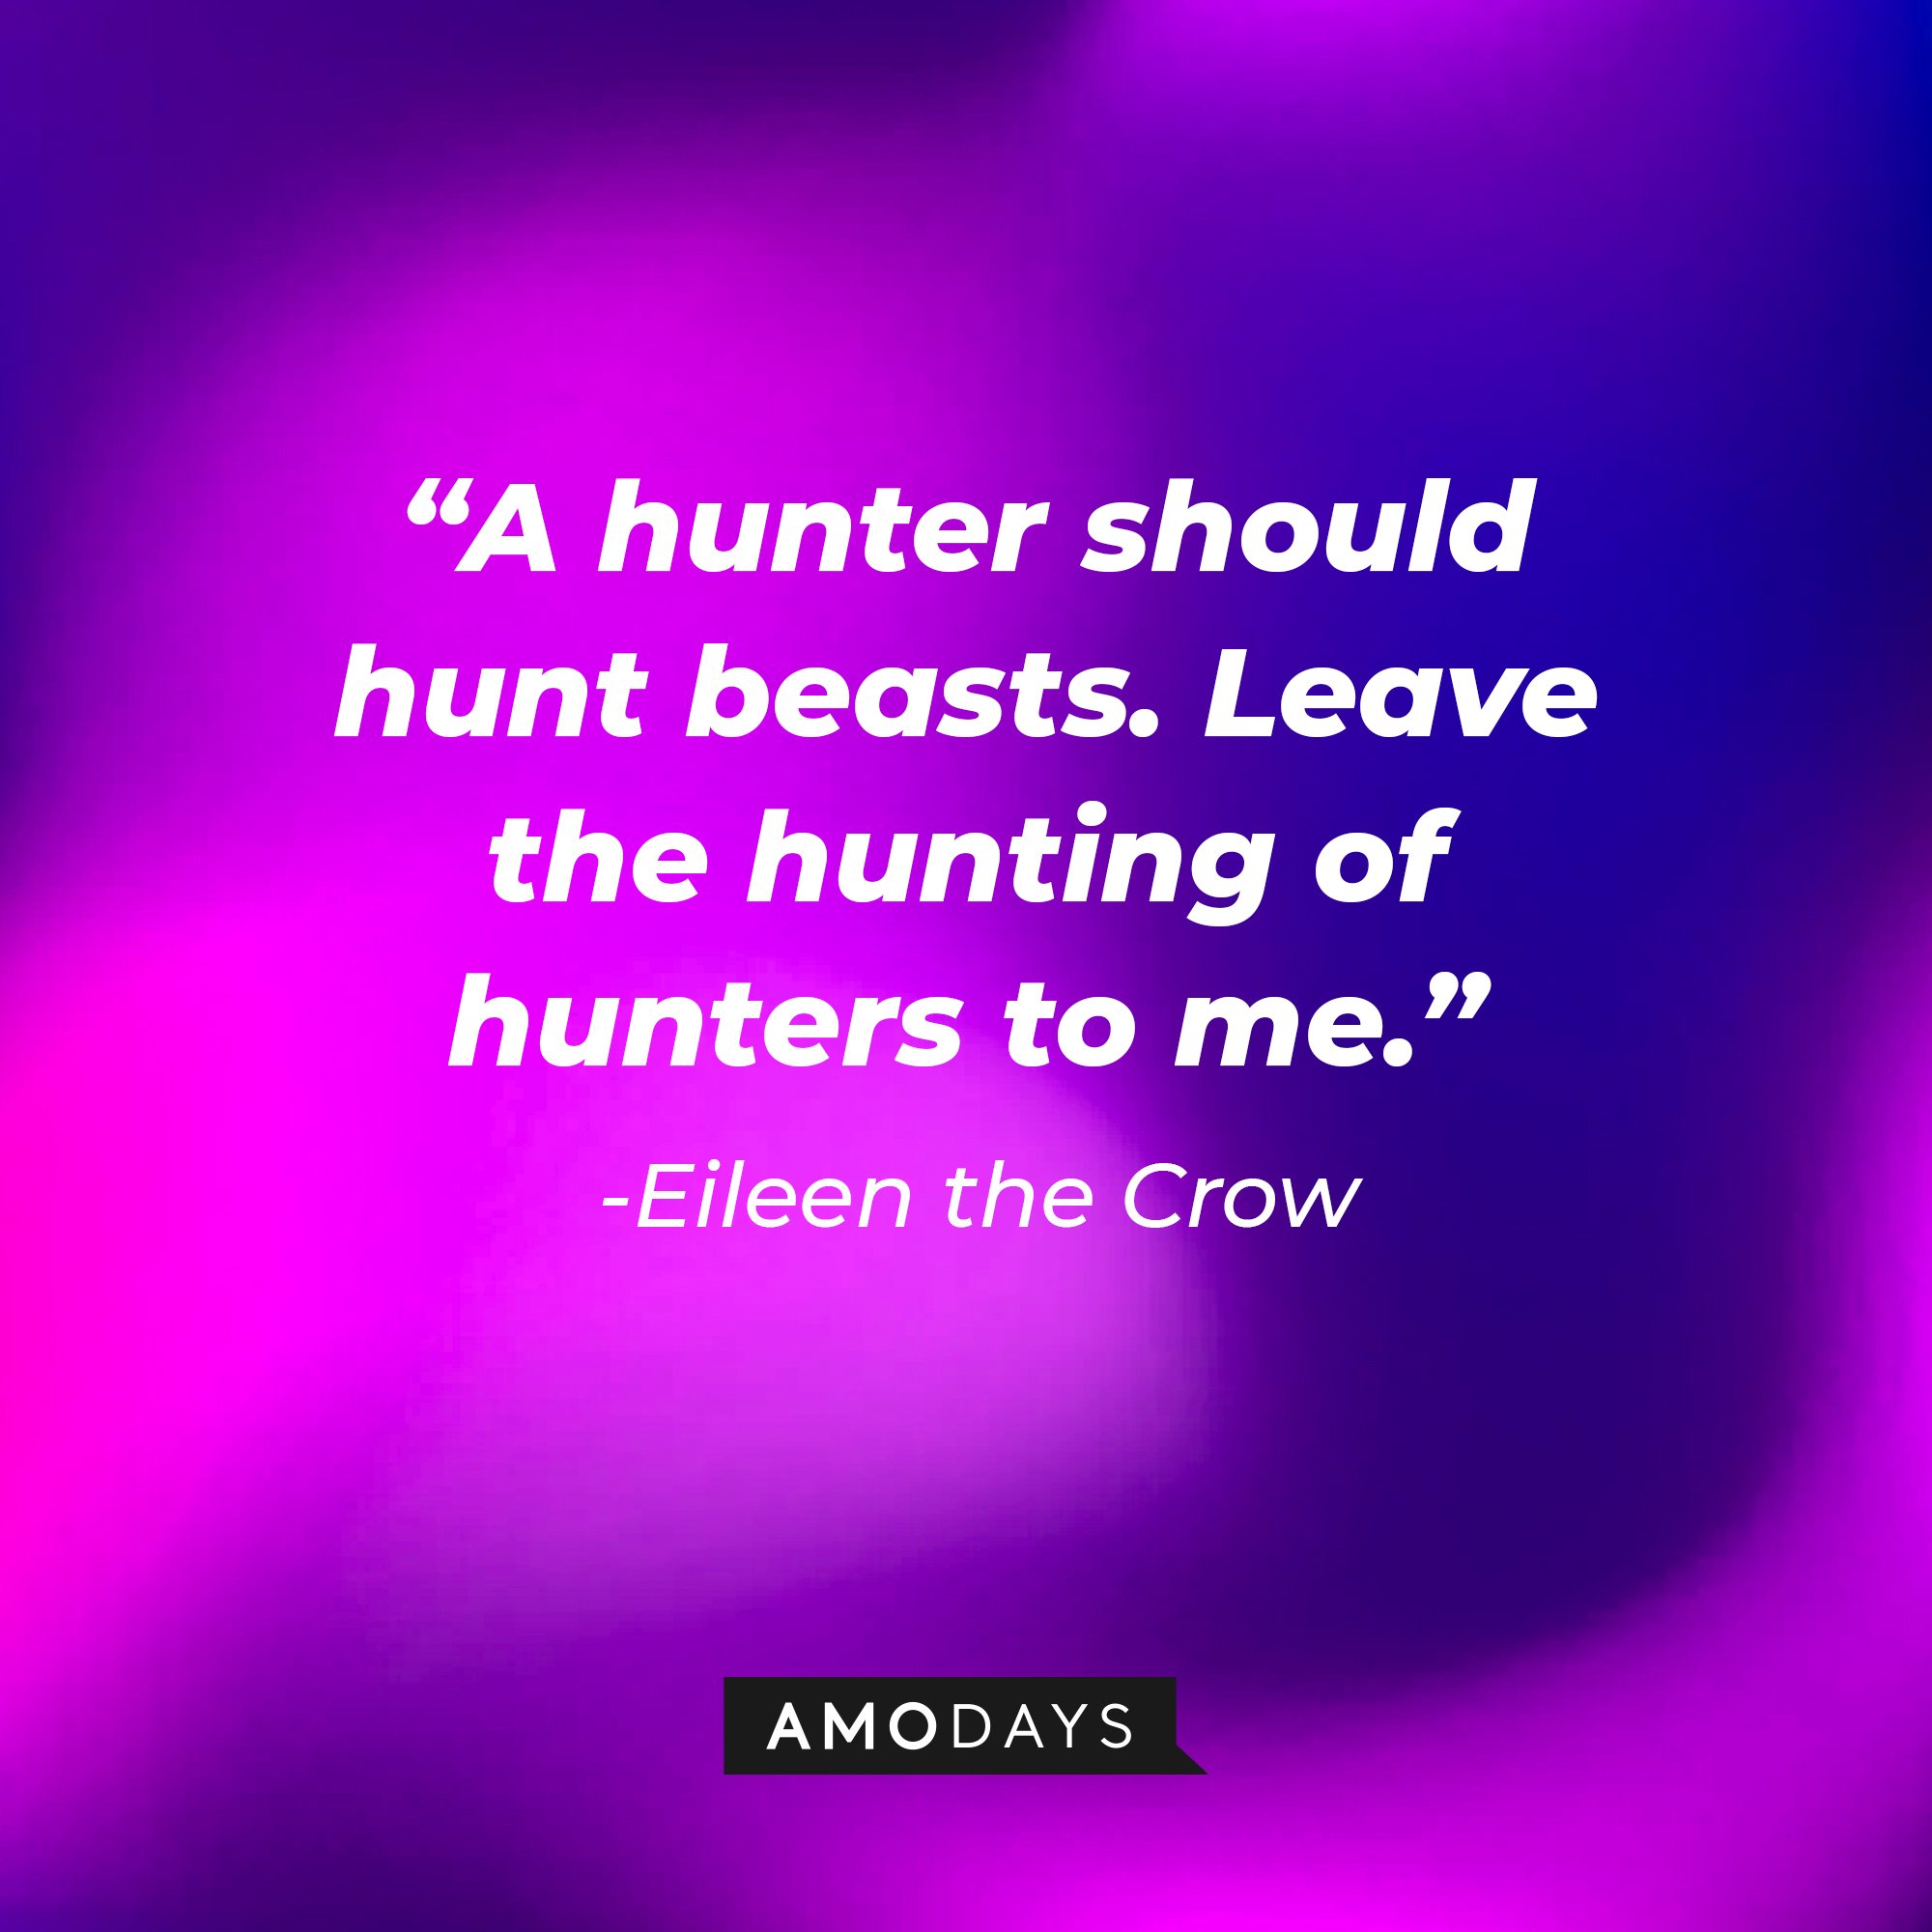  Eileen the Crow’s quote: "A hunter should hunt beasts. Leave the hunting of hunters to me." | Image: AmoDays